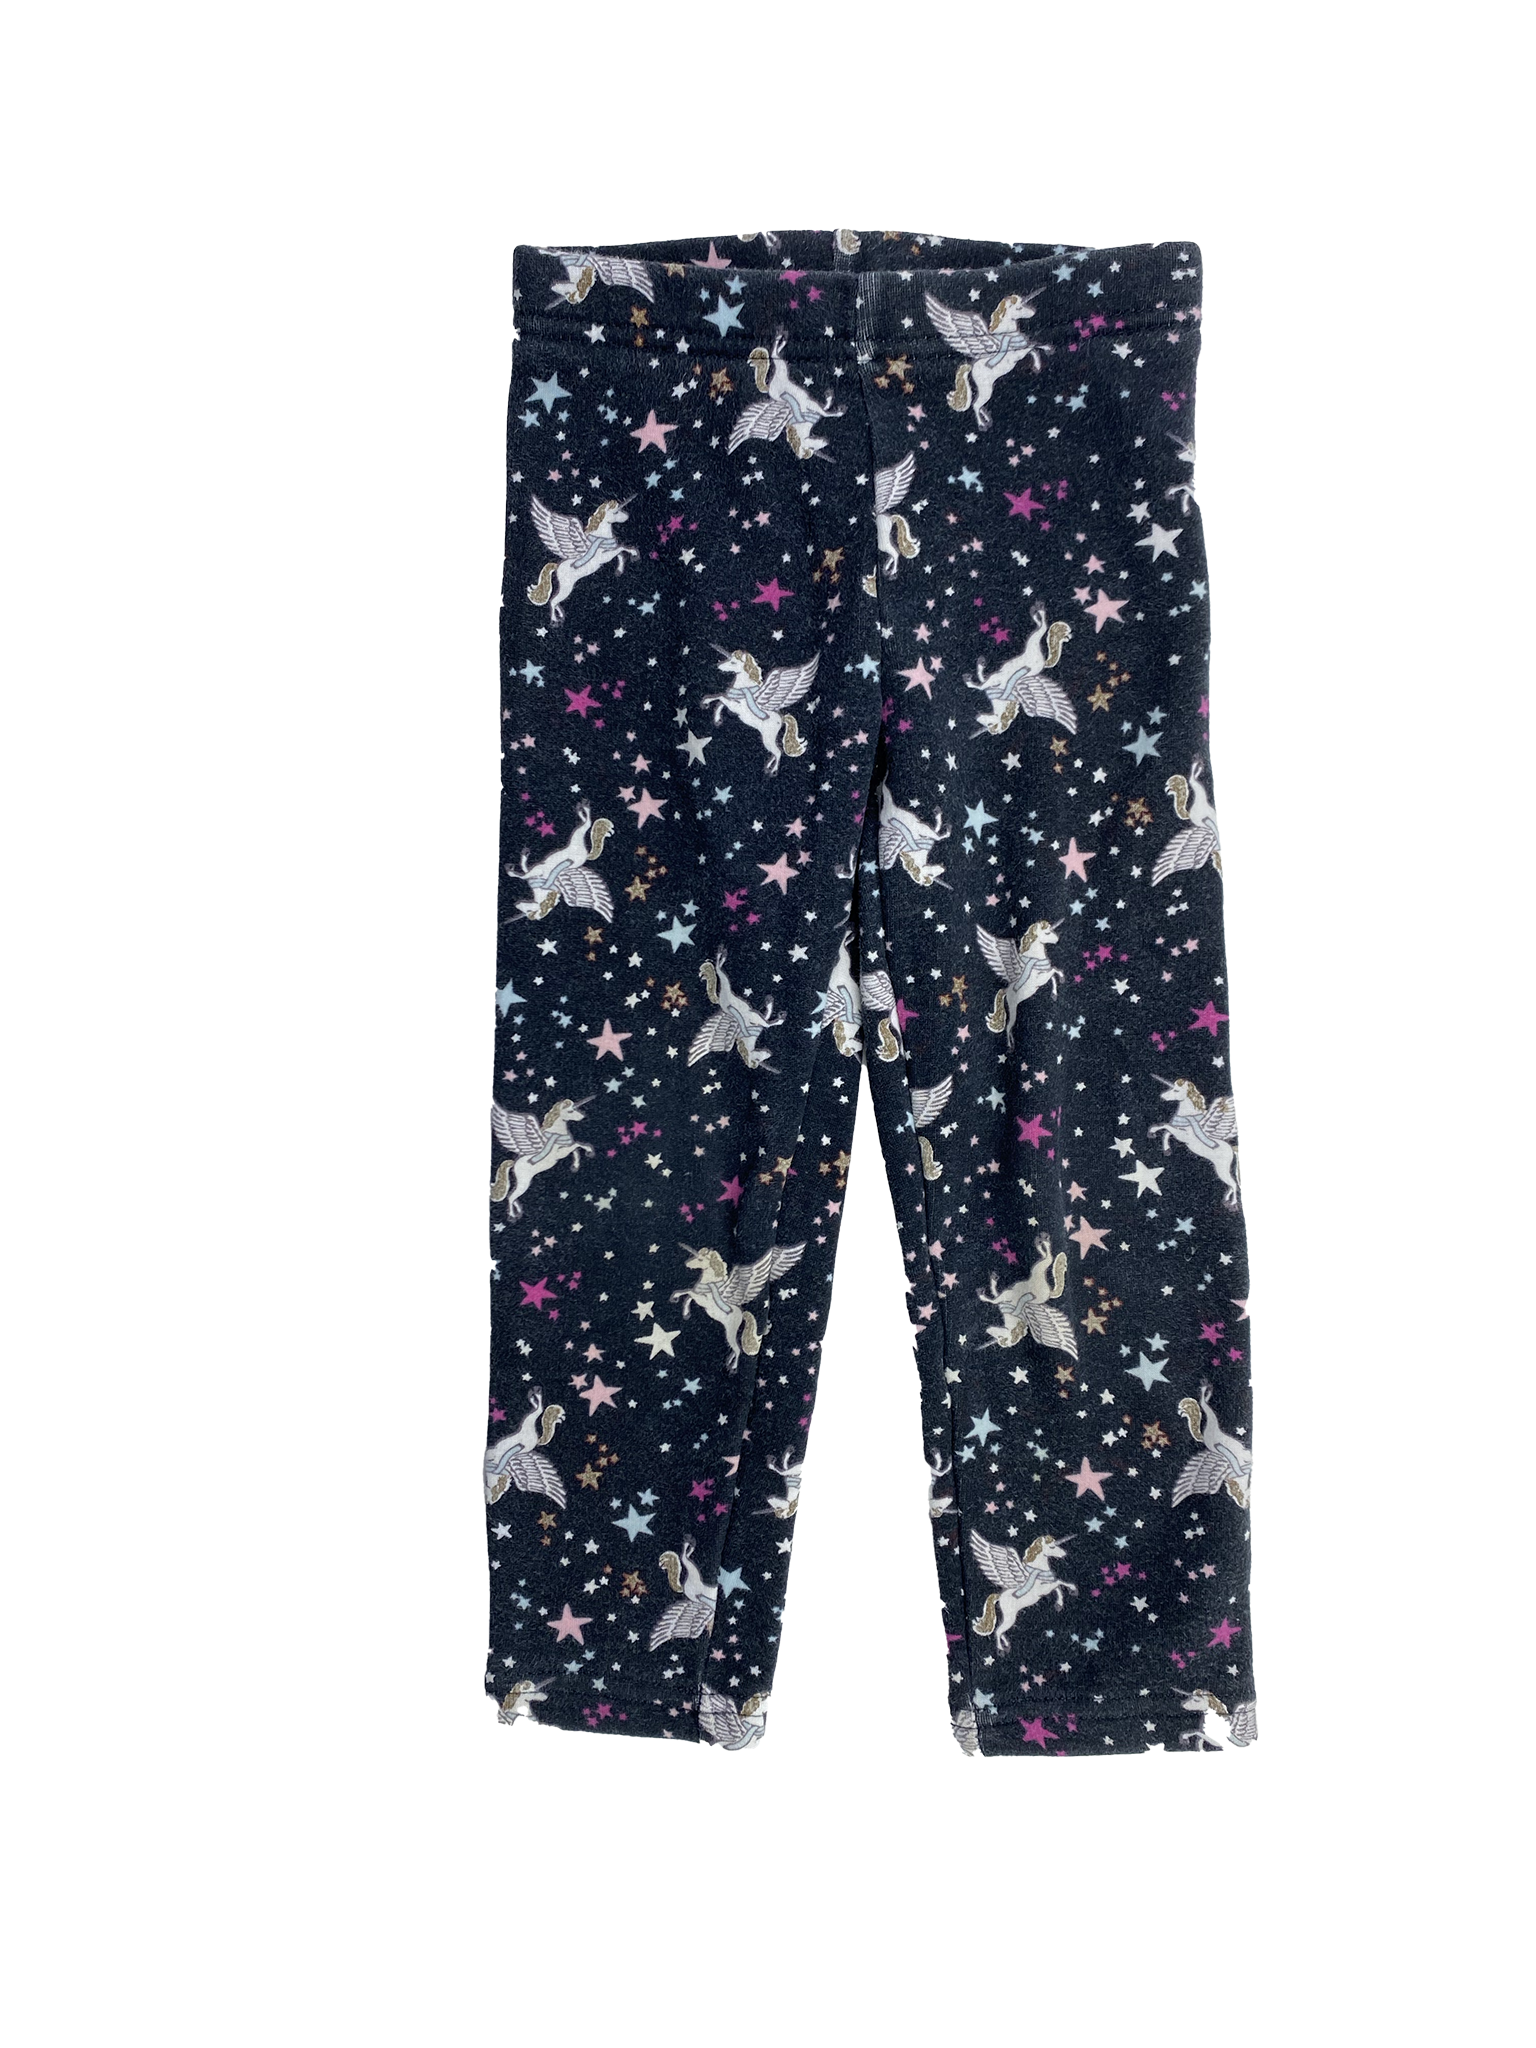 Carter's Black Double-Lined Leggings with Stars & Unicorns 3T